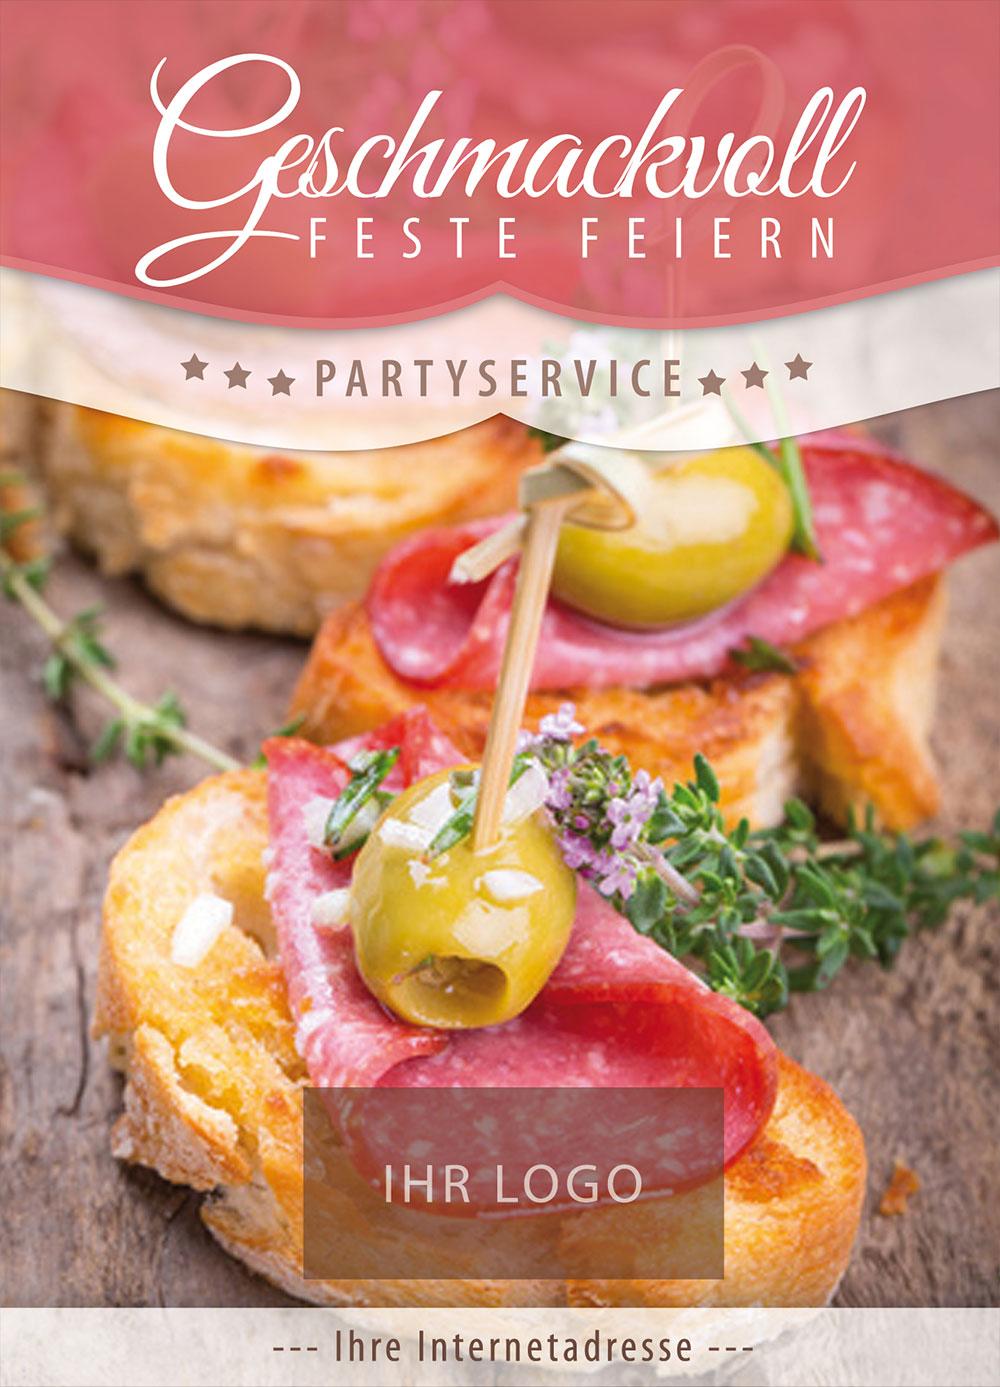 Plakat, Poster-Motiv: Partyservice & Catering